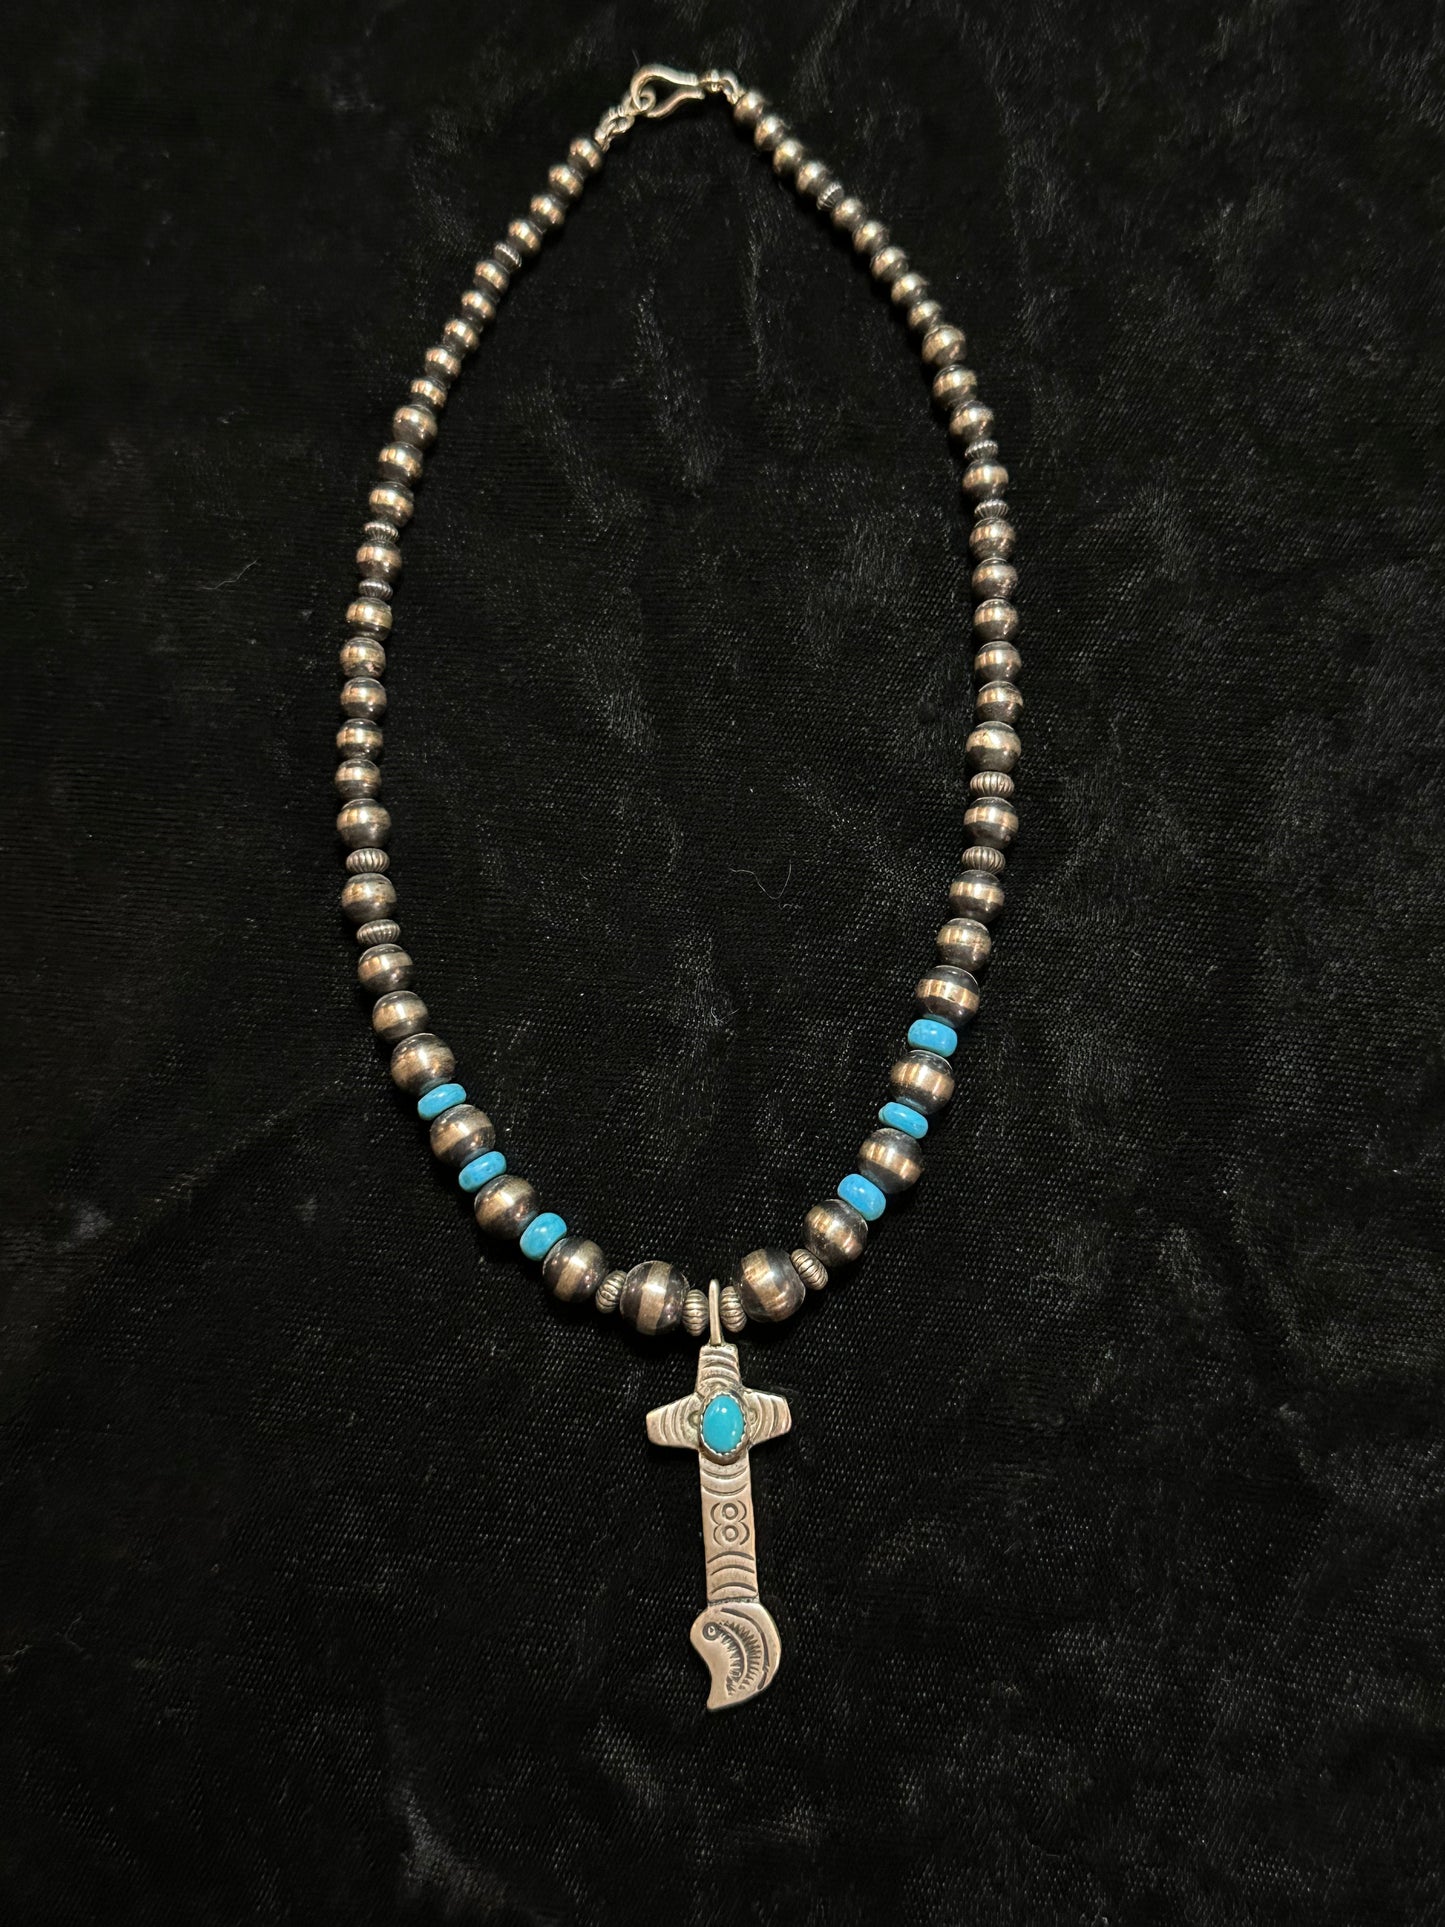 Graduated Navajo Pearls and Sleeping Beauty Turquoise with Pendant